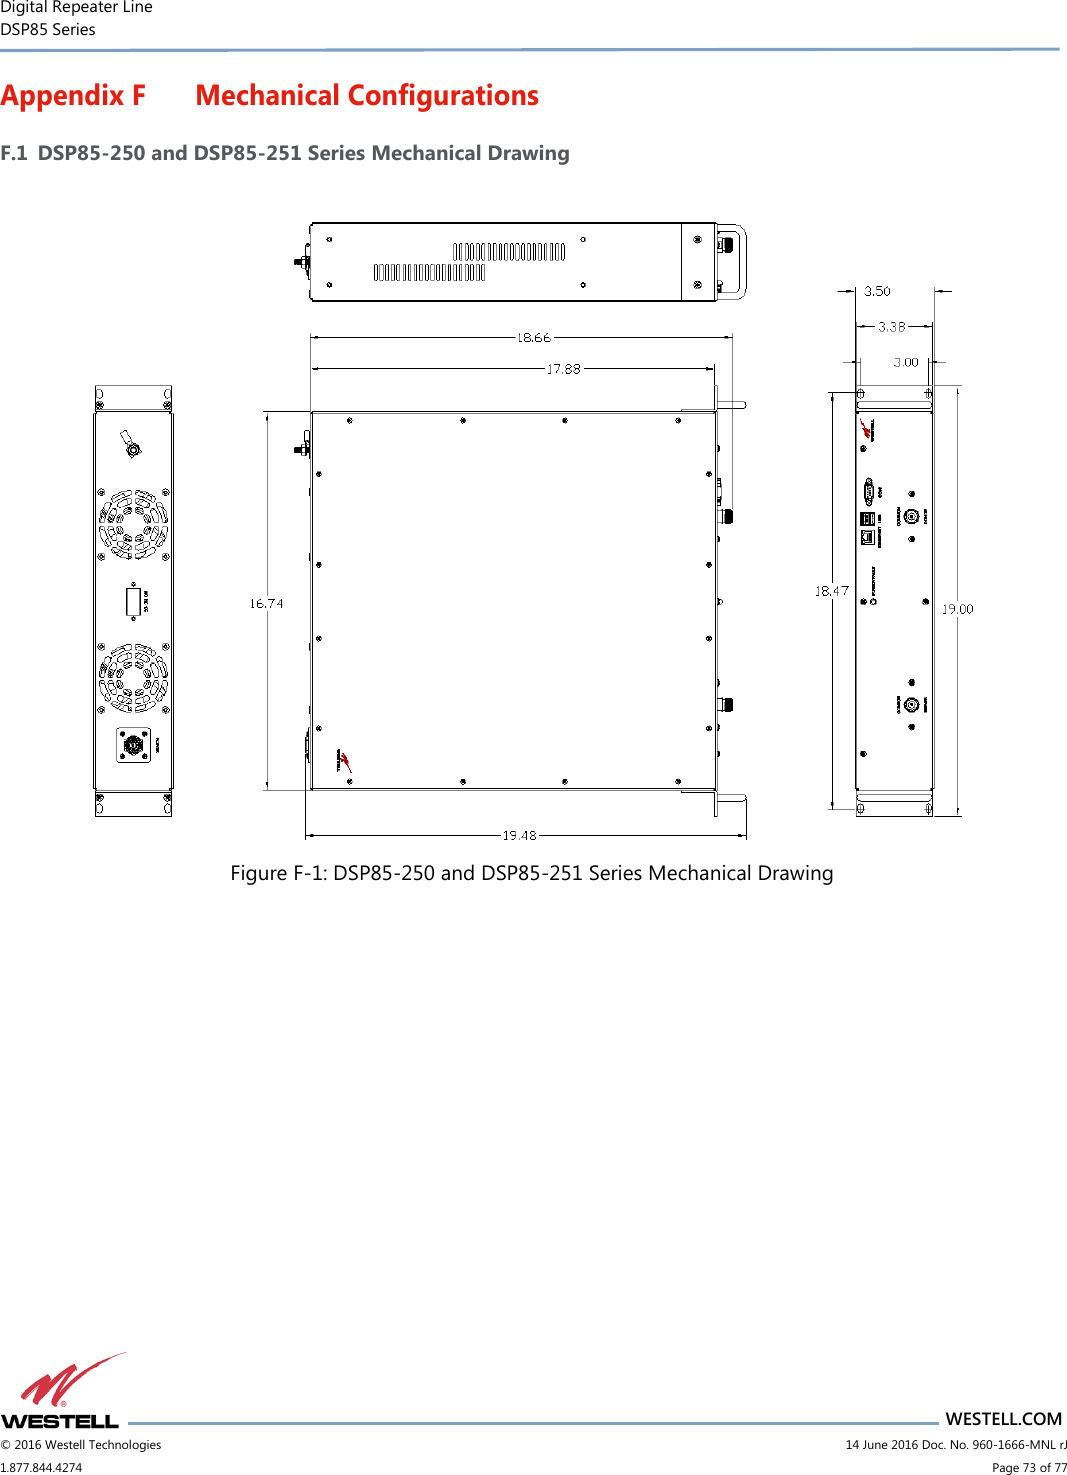 Digital Repeater Line DSP85 Series                       WESTELL.COM © 2016 Westell Technologies                         14 June 2016 Doc. No. 960-1666-MNL rJ 1.877.844.4274                             Page 73 of 77  Appendix F Mechanical Configurations F.1 DSP85-250 and DSP85-251 Series Mechanical Drawing   Figure F-1: DSP85-250 and DSP85-251 Series Mechanical Drawing     